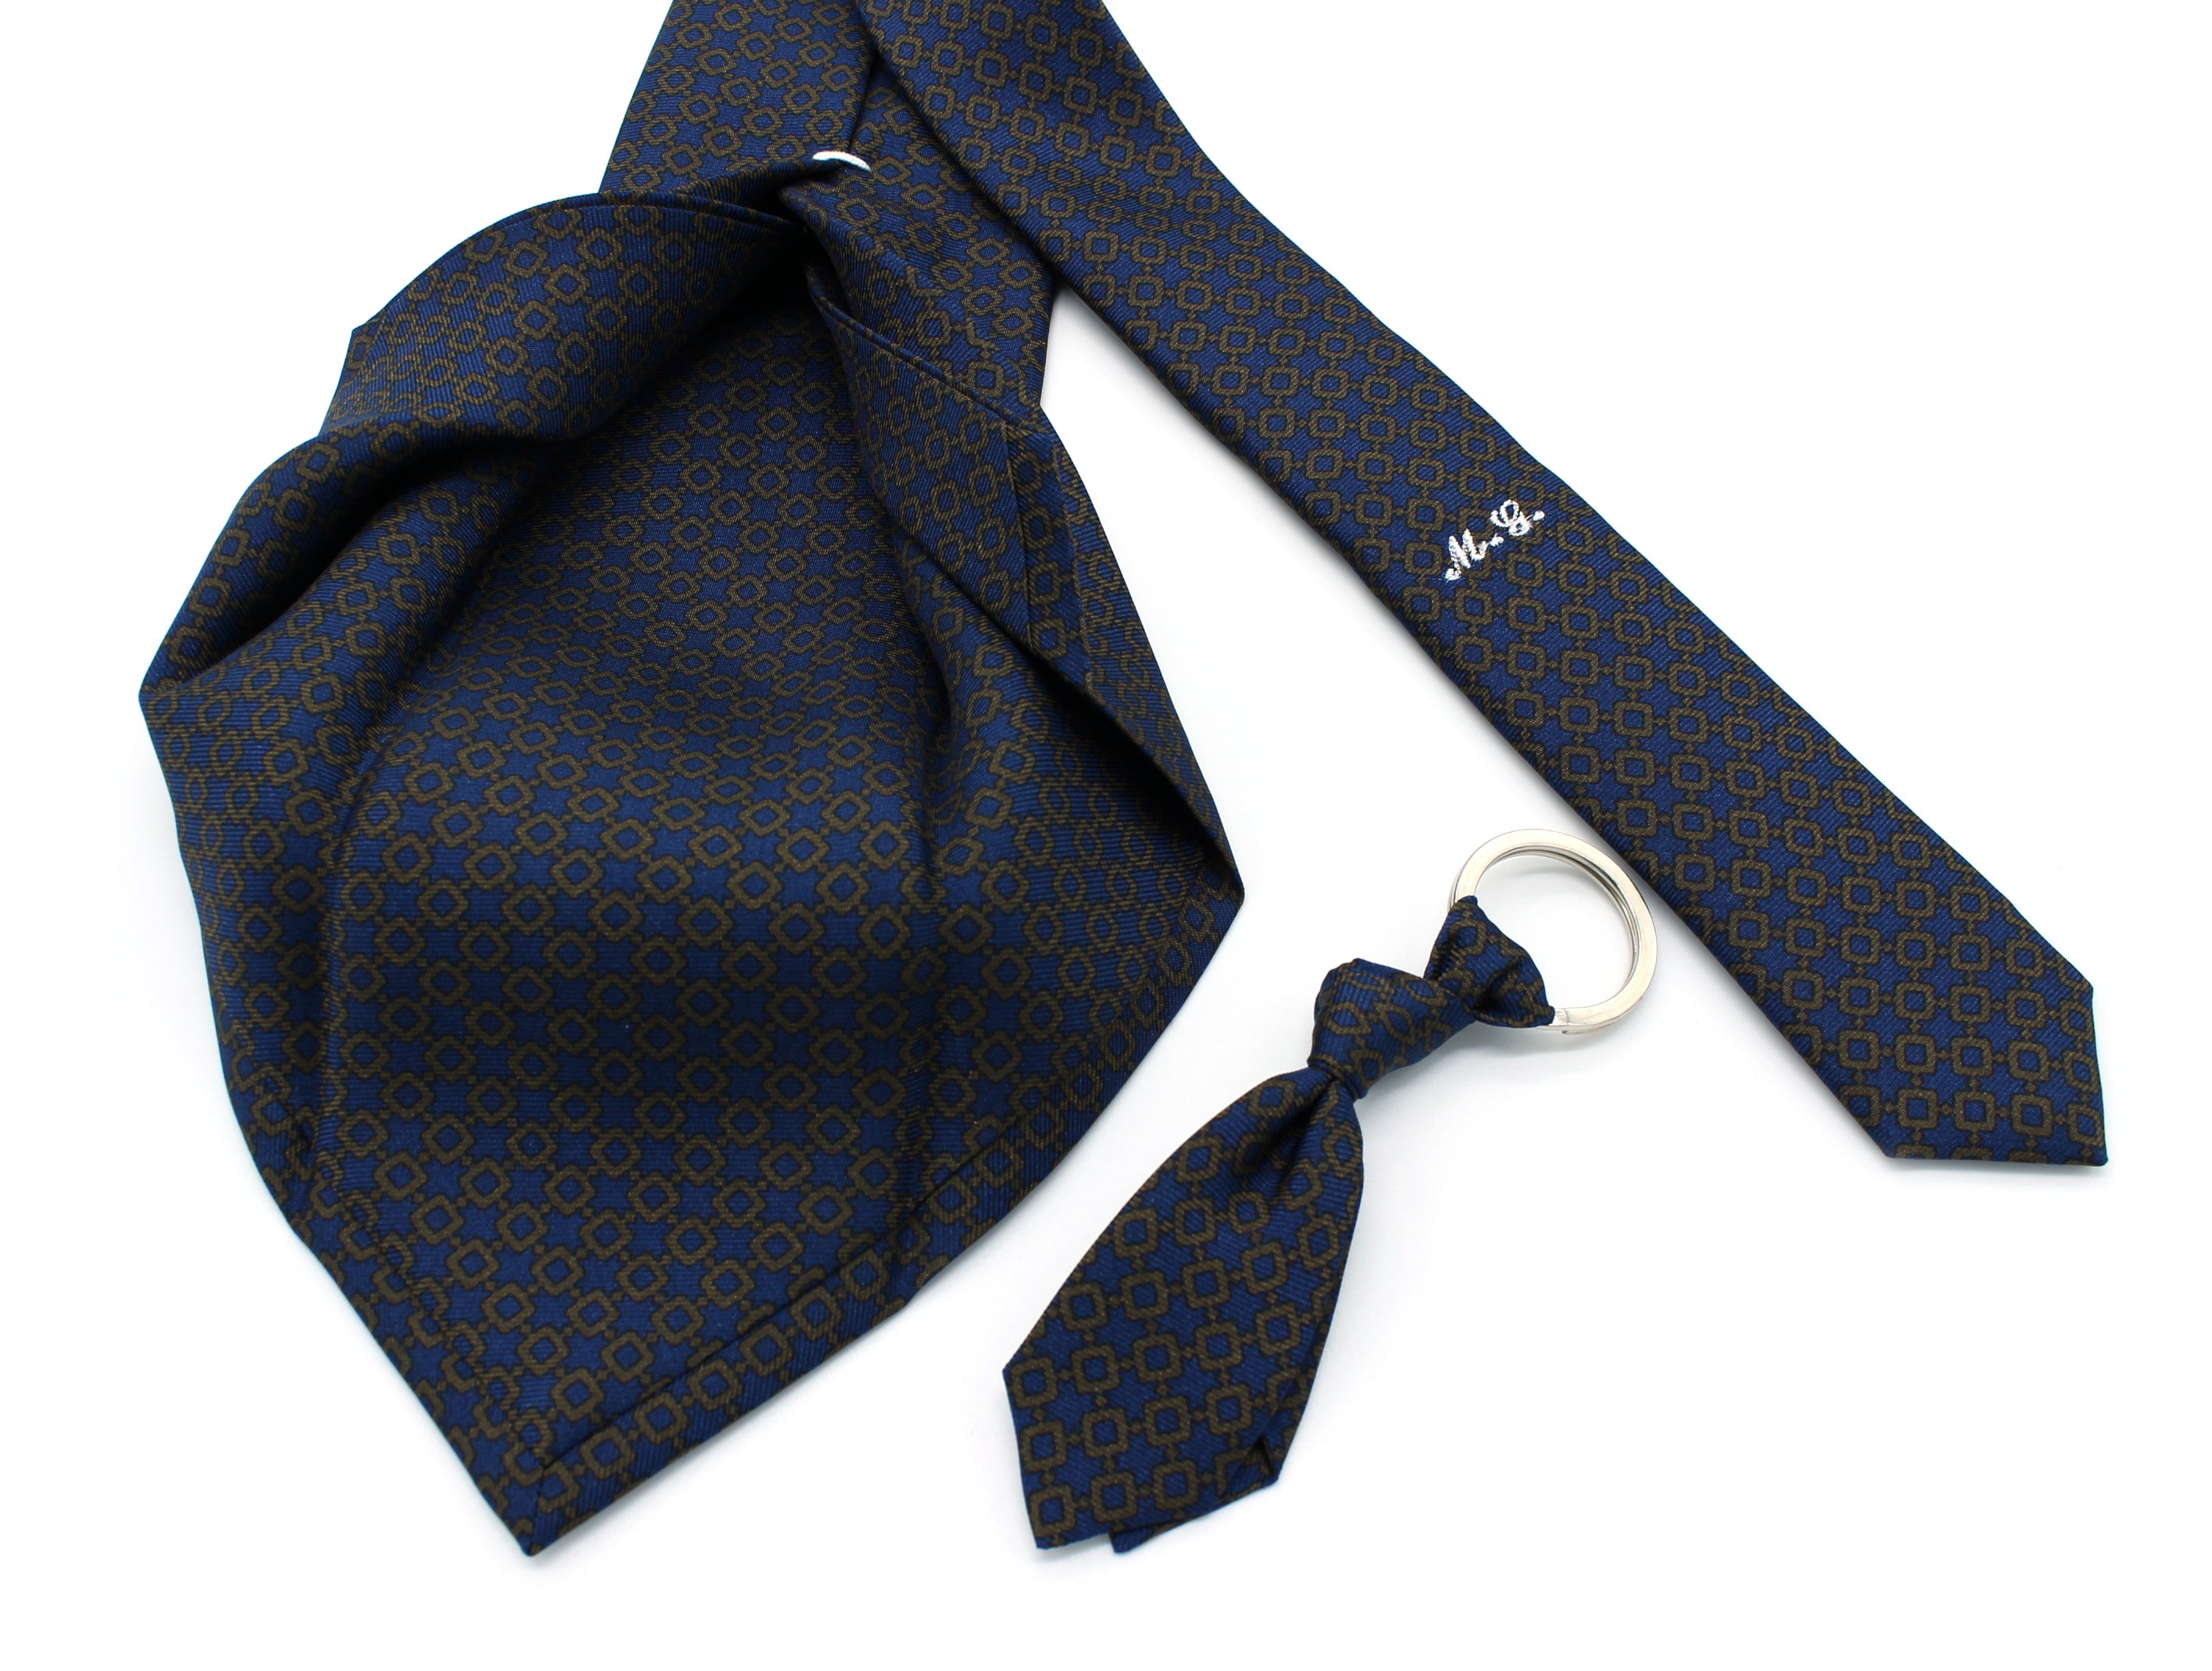 Seven-fold tie made to measure - micro-pattern 9434-4